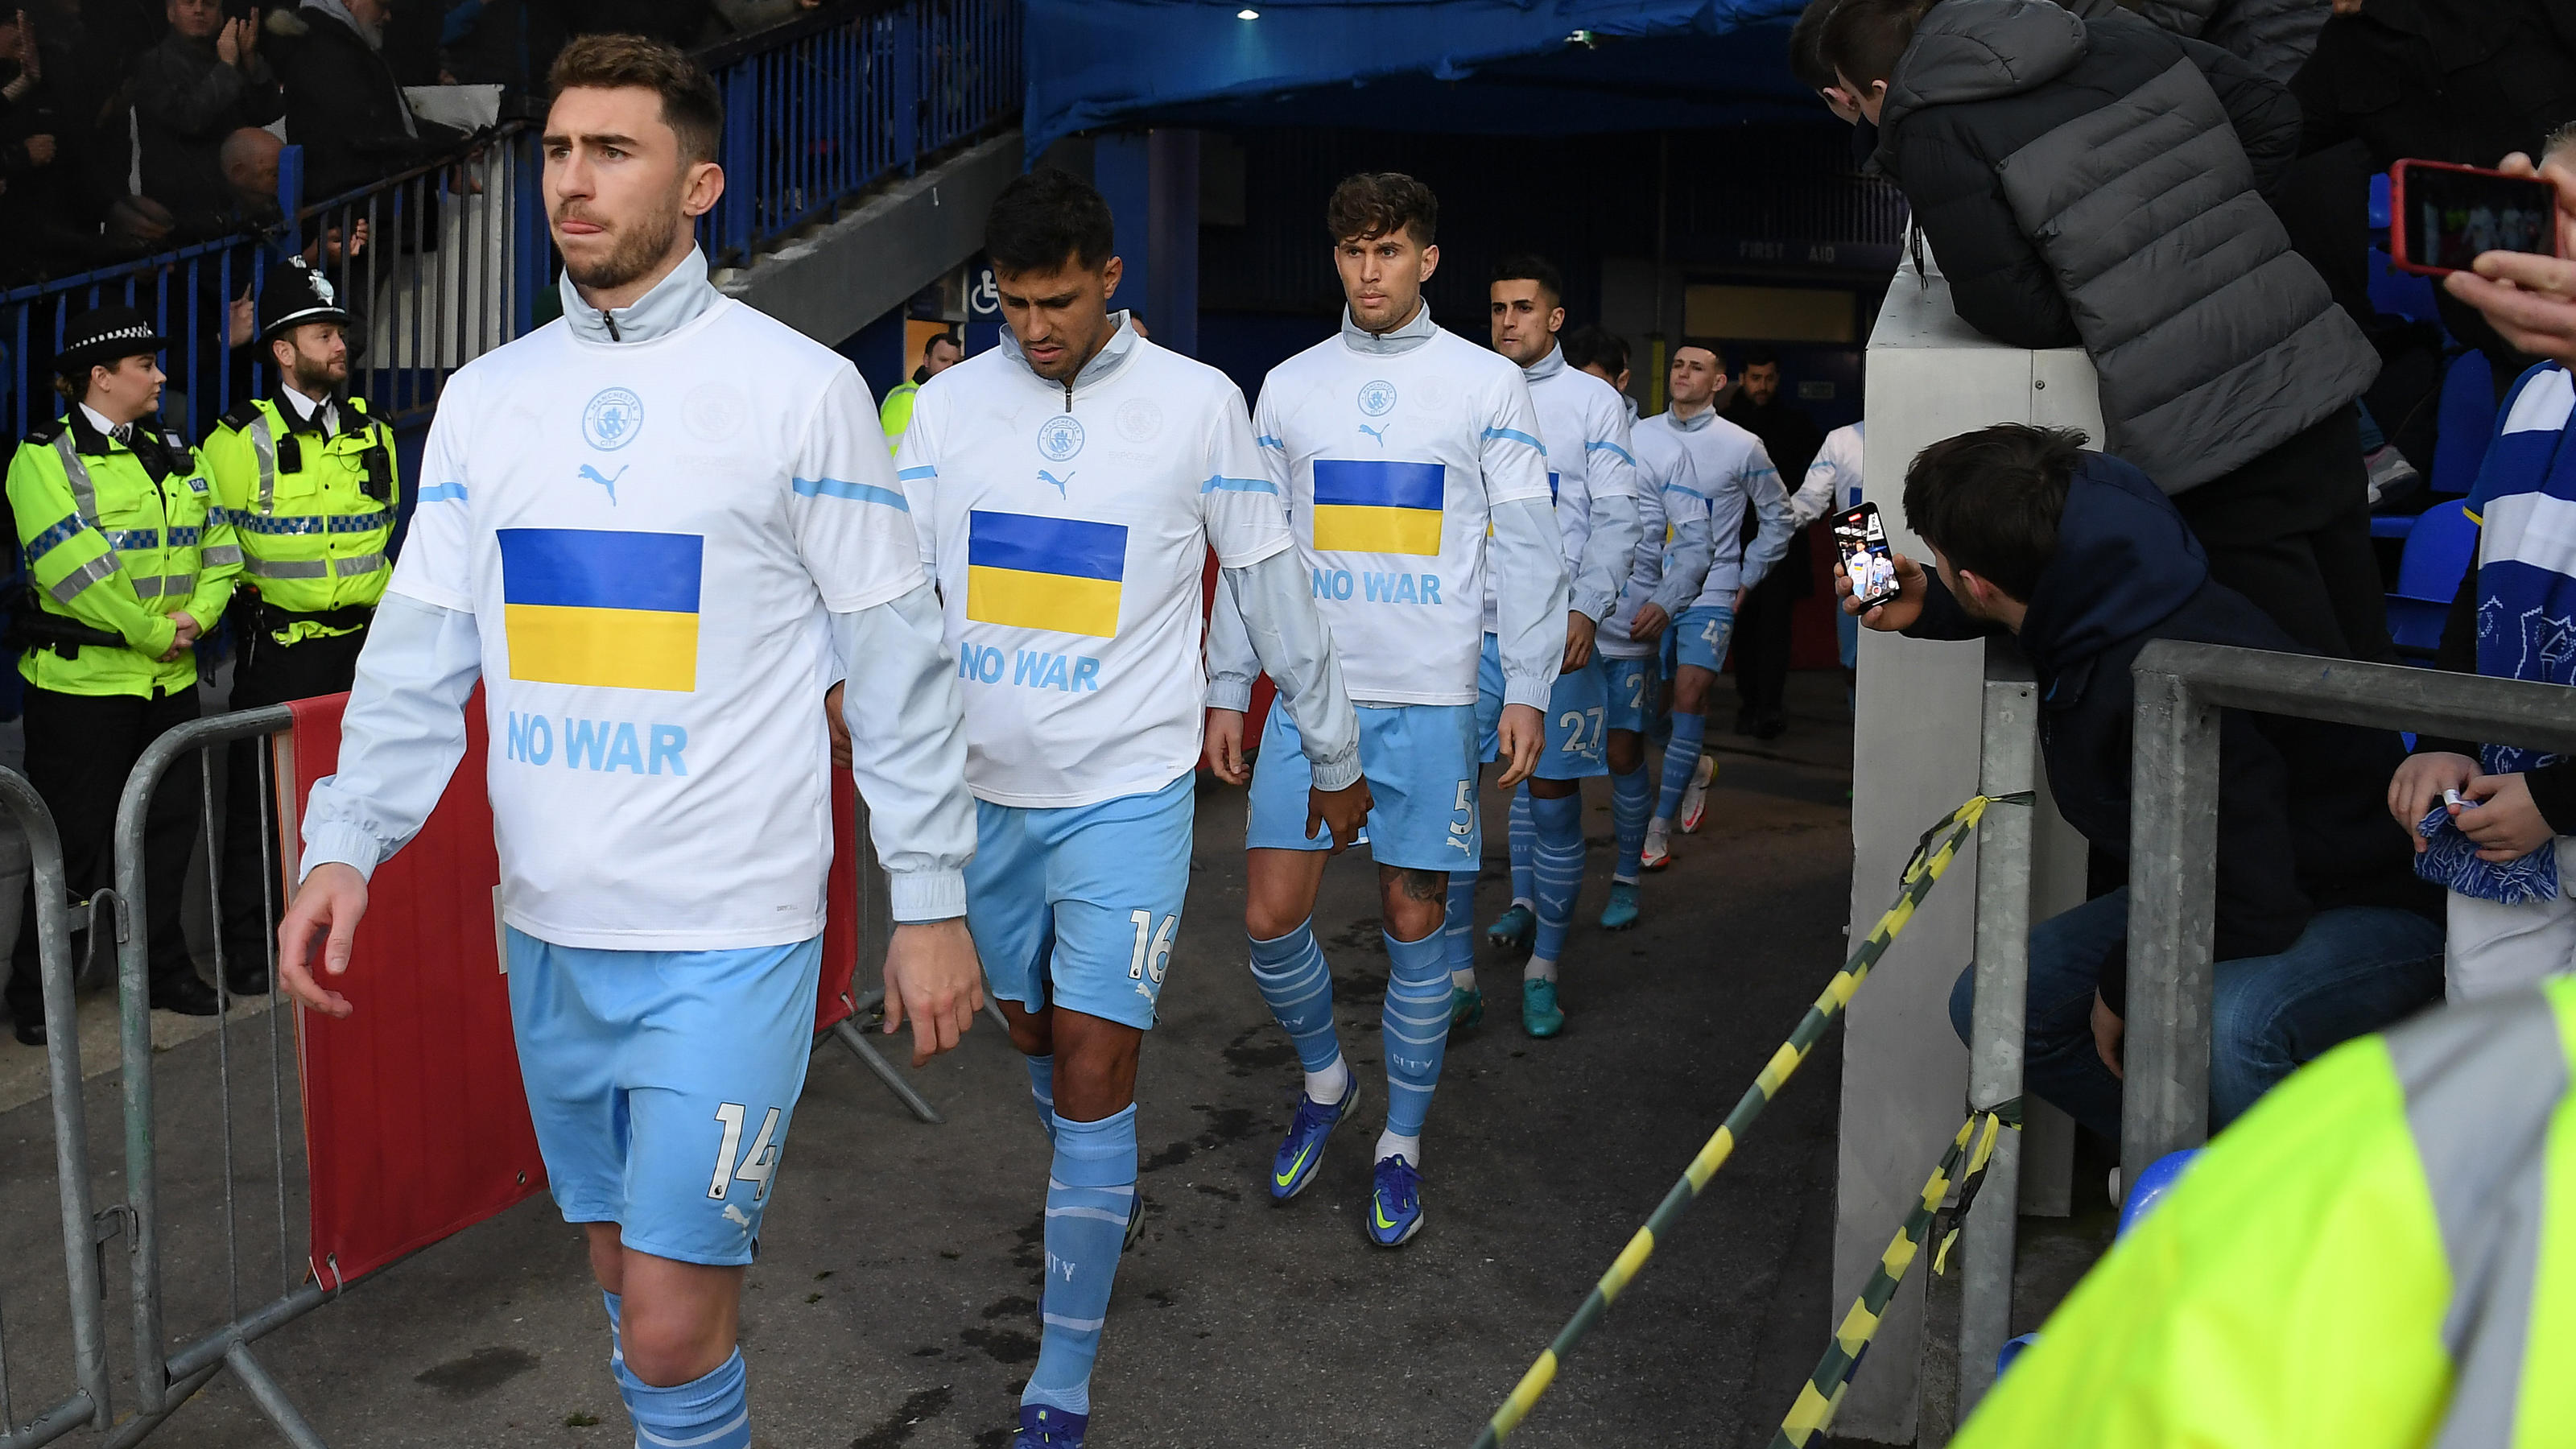 LIVERPOOL, ENGLAND - FEBRUARY 26: Aymeric Laporte of Manchester City leads their team out with Ukrainian flags on their jackets to indicate peace and sympathy with Ukraine prior to the Premier League match between Everton and Manchester City at Goodi